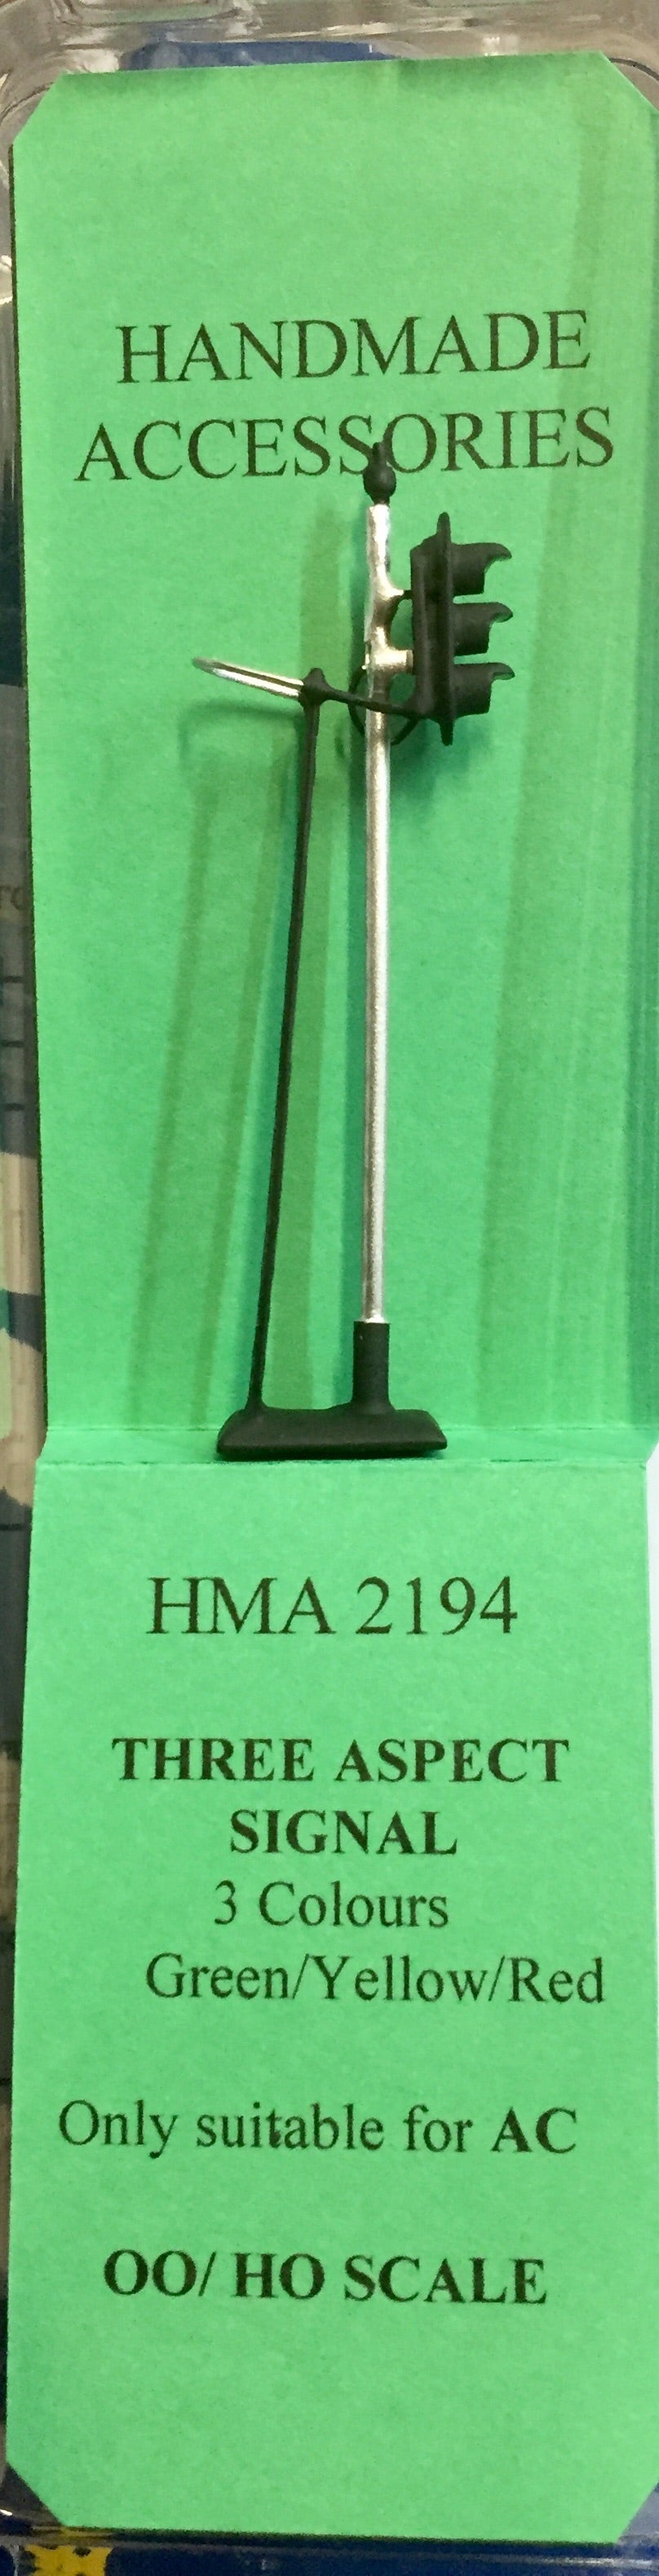 HMA 2194 THREE ASPECT SIGNAL GREEN / YELLOW/ RED 12 TO 15 VOLTS "AC OPERATION ONLY" HO HAND MADE ACCESSORIES.